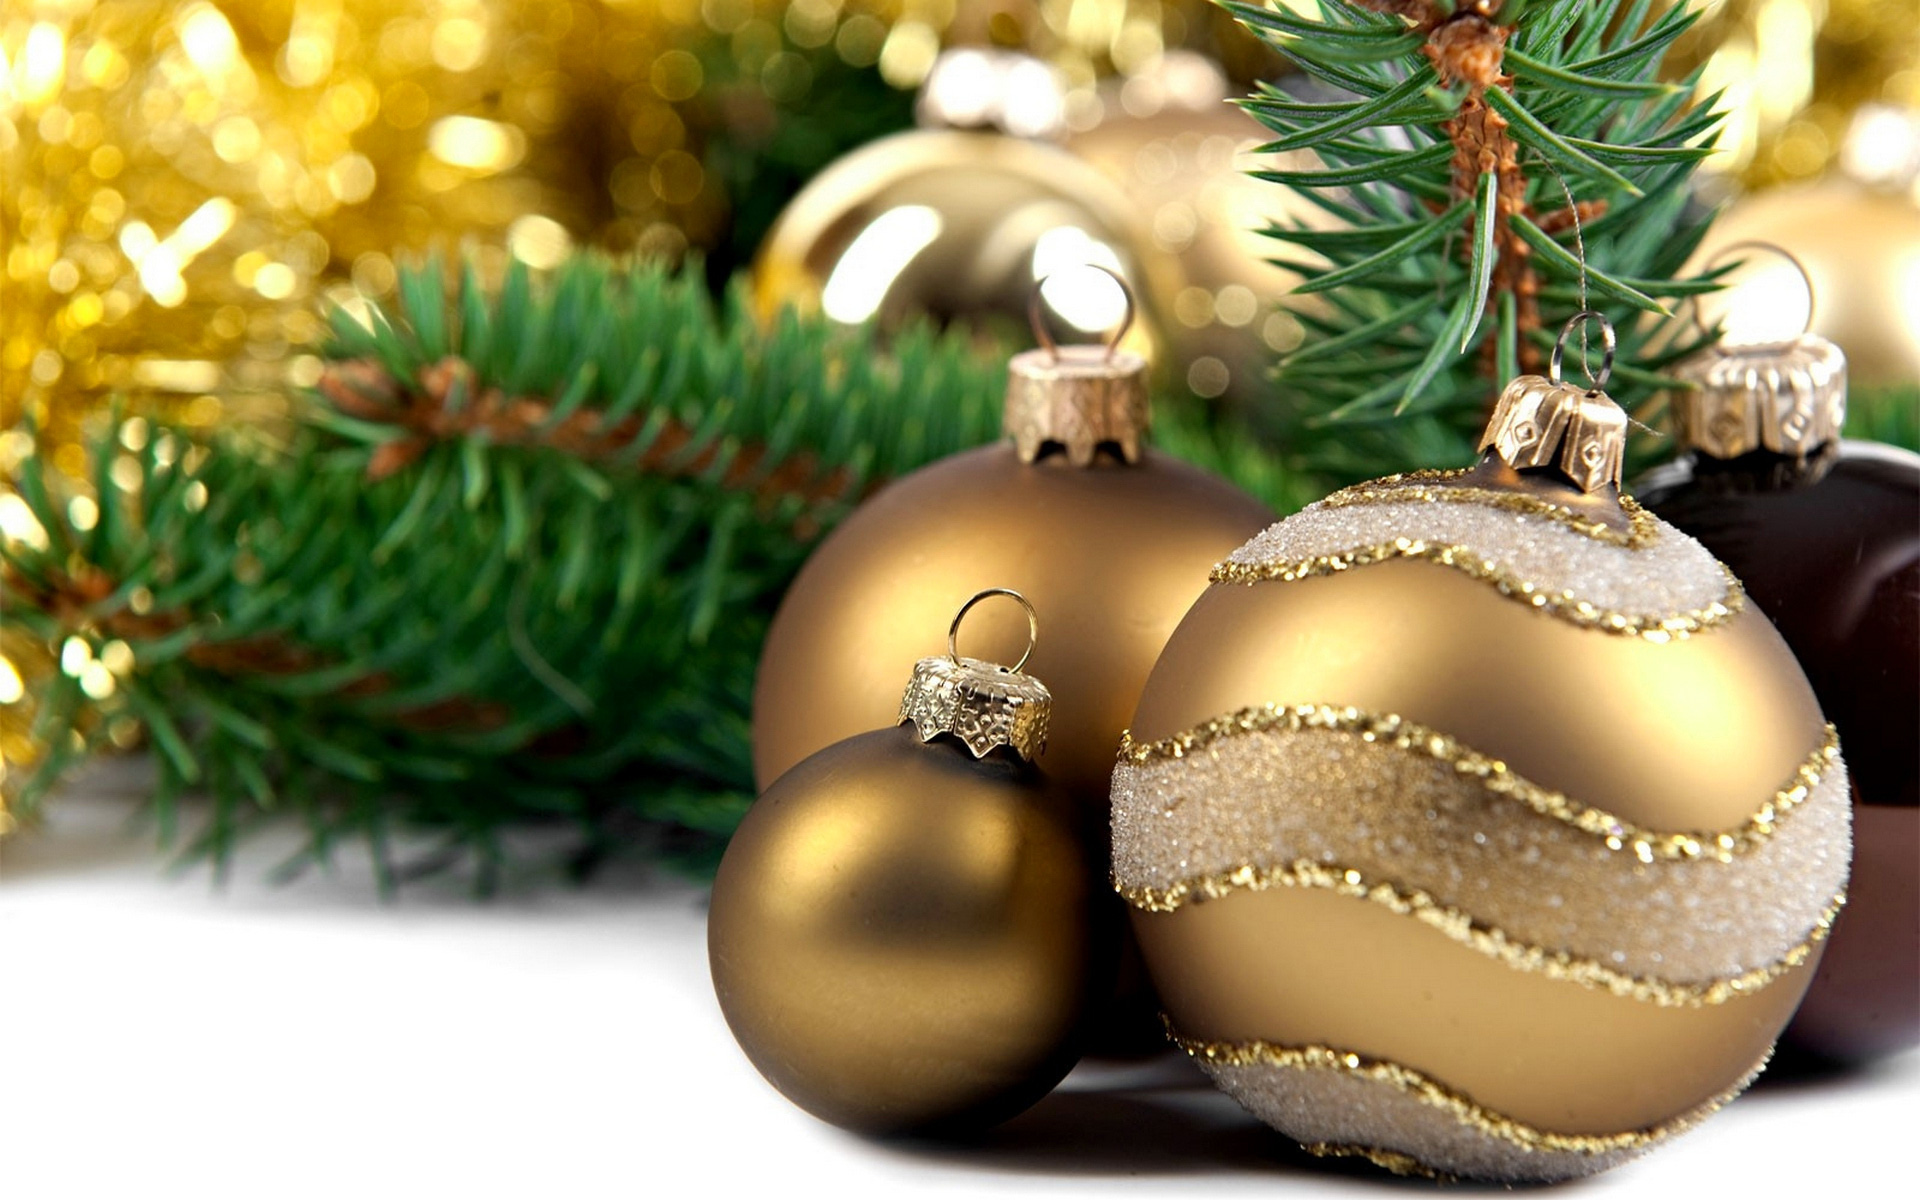 Large_Christmas_Background_with_Ornaments.jpg?m=1399676400